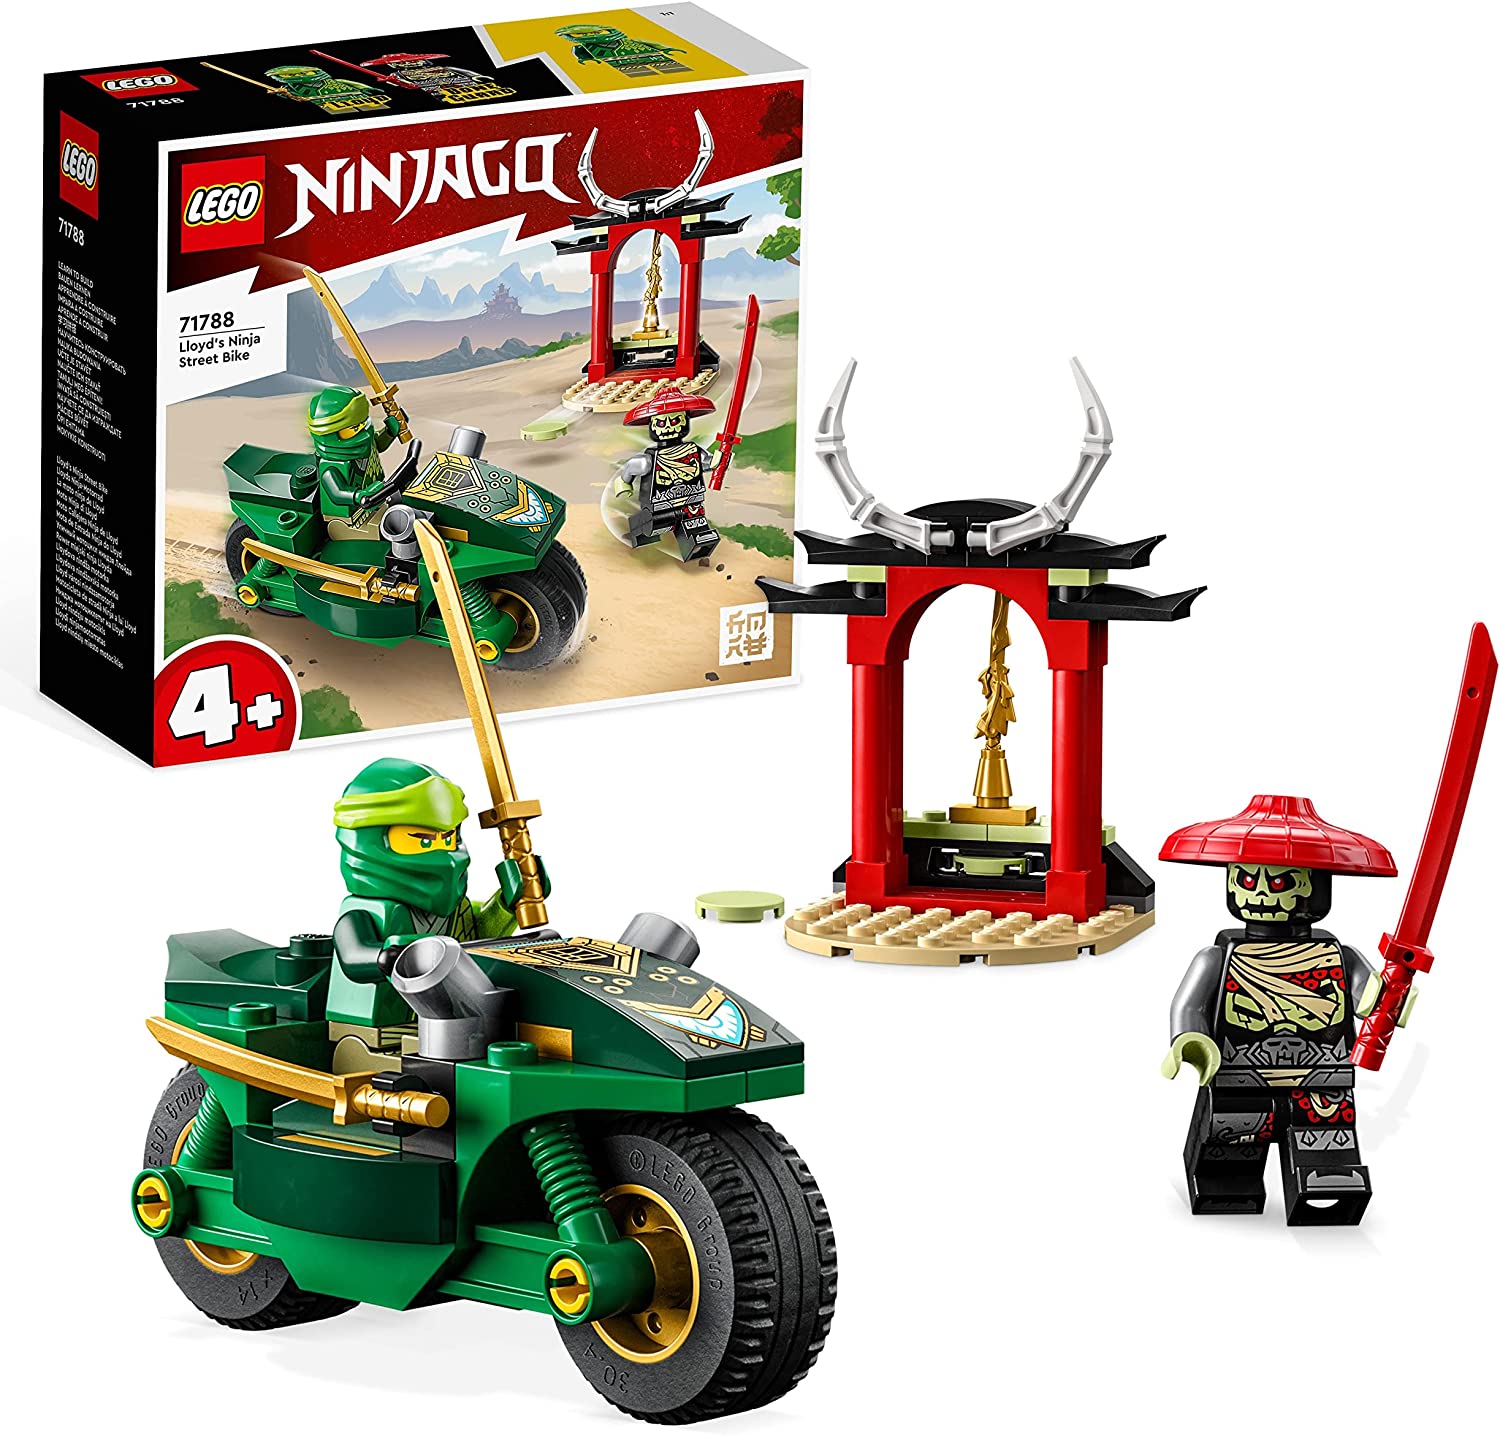 LEGO 71788 Ninjago Lloyds Ninja Motorcycle Toy for Beginners with 2 Mini Figures: Lloyd and Skeleton Guard, Educational Toy for Children from 4 Years